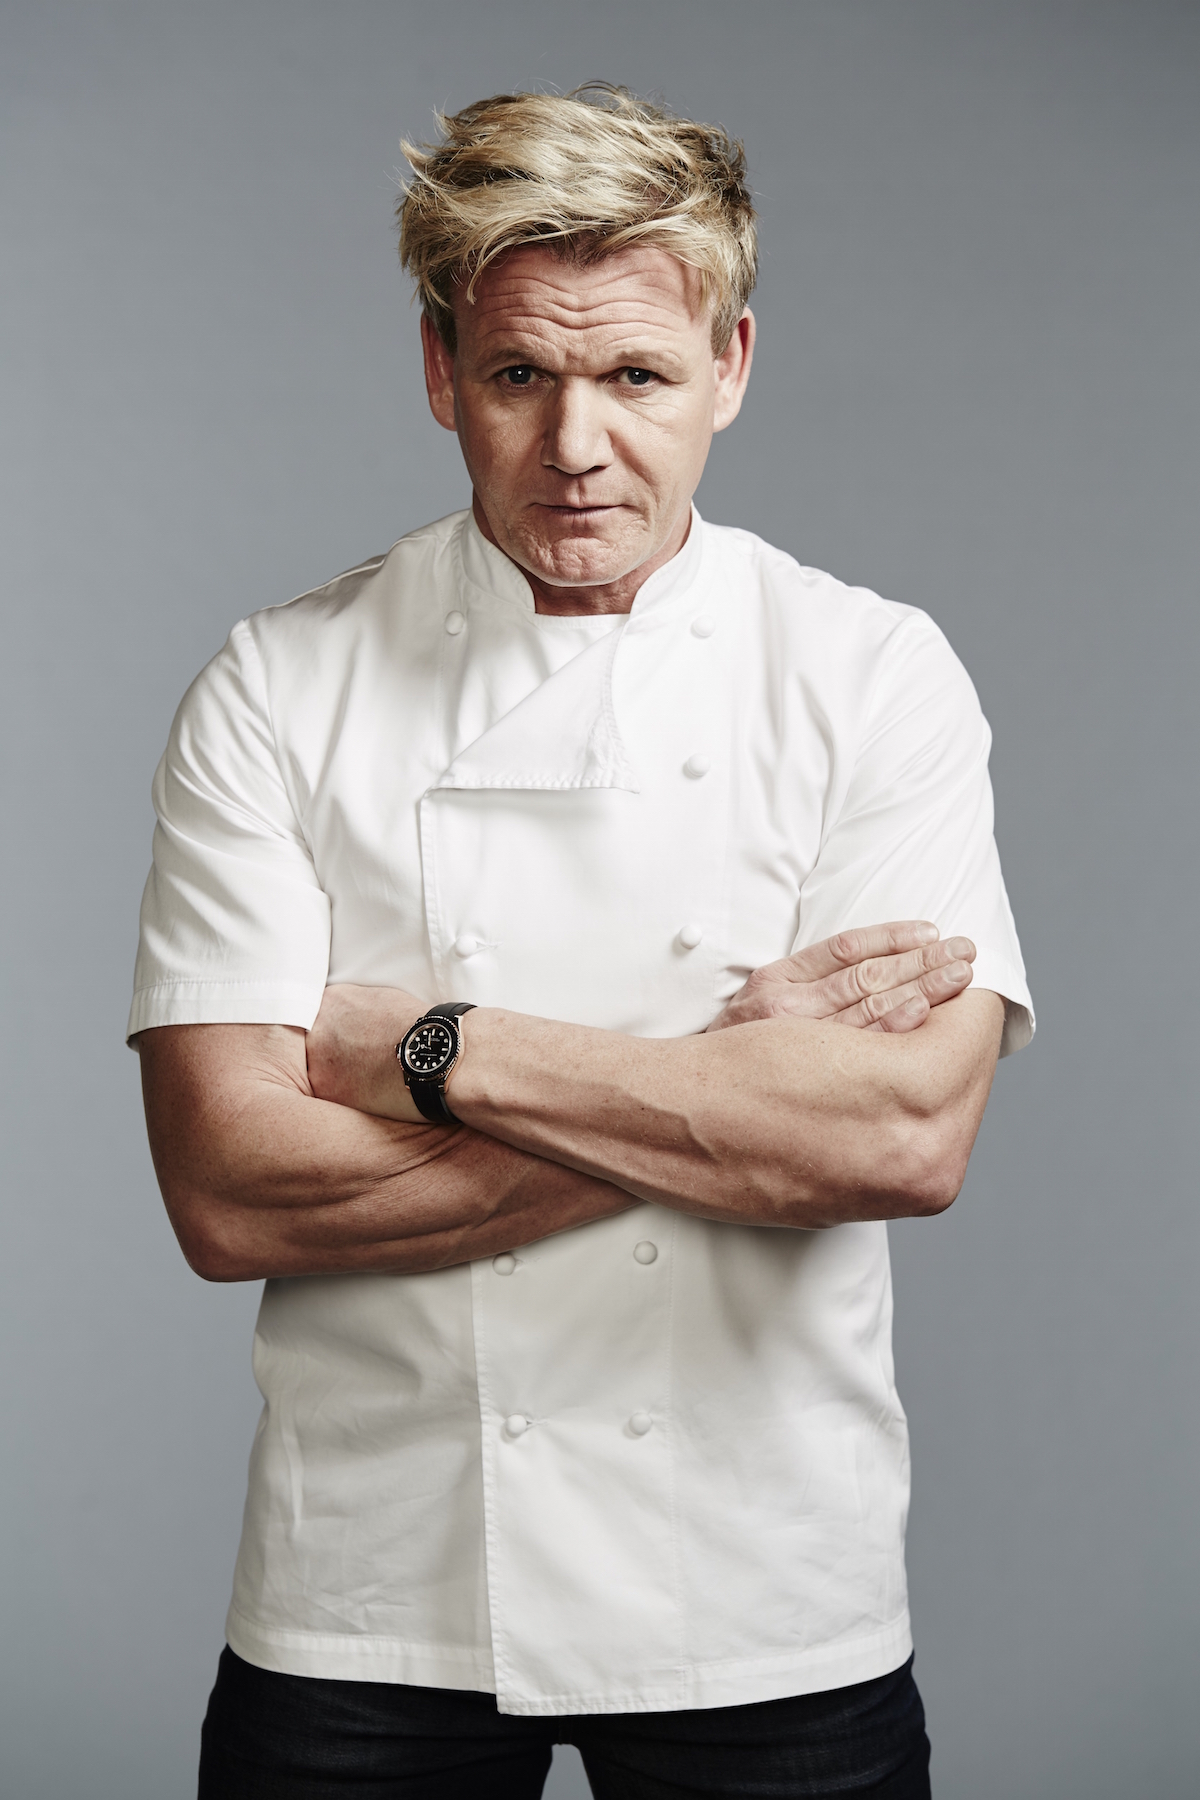 Chef, author and TV personality Gordon Ramsey has developed a cult following all over the world (photo: Dining Concepts)